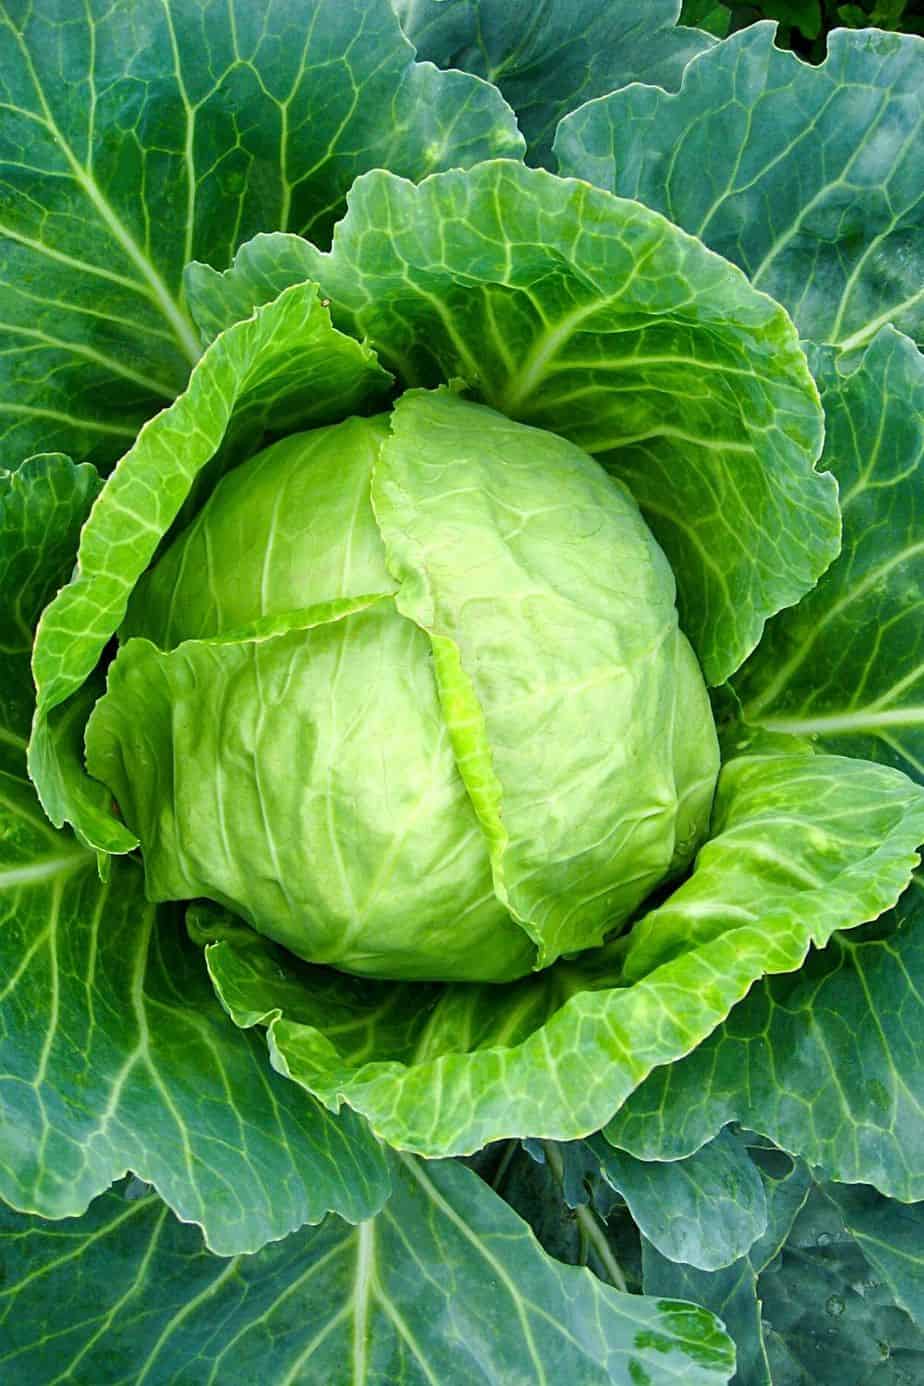 Cabbage is another flowering vegetable that you can grow on a raised bed